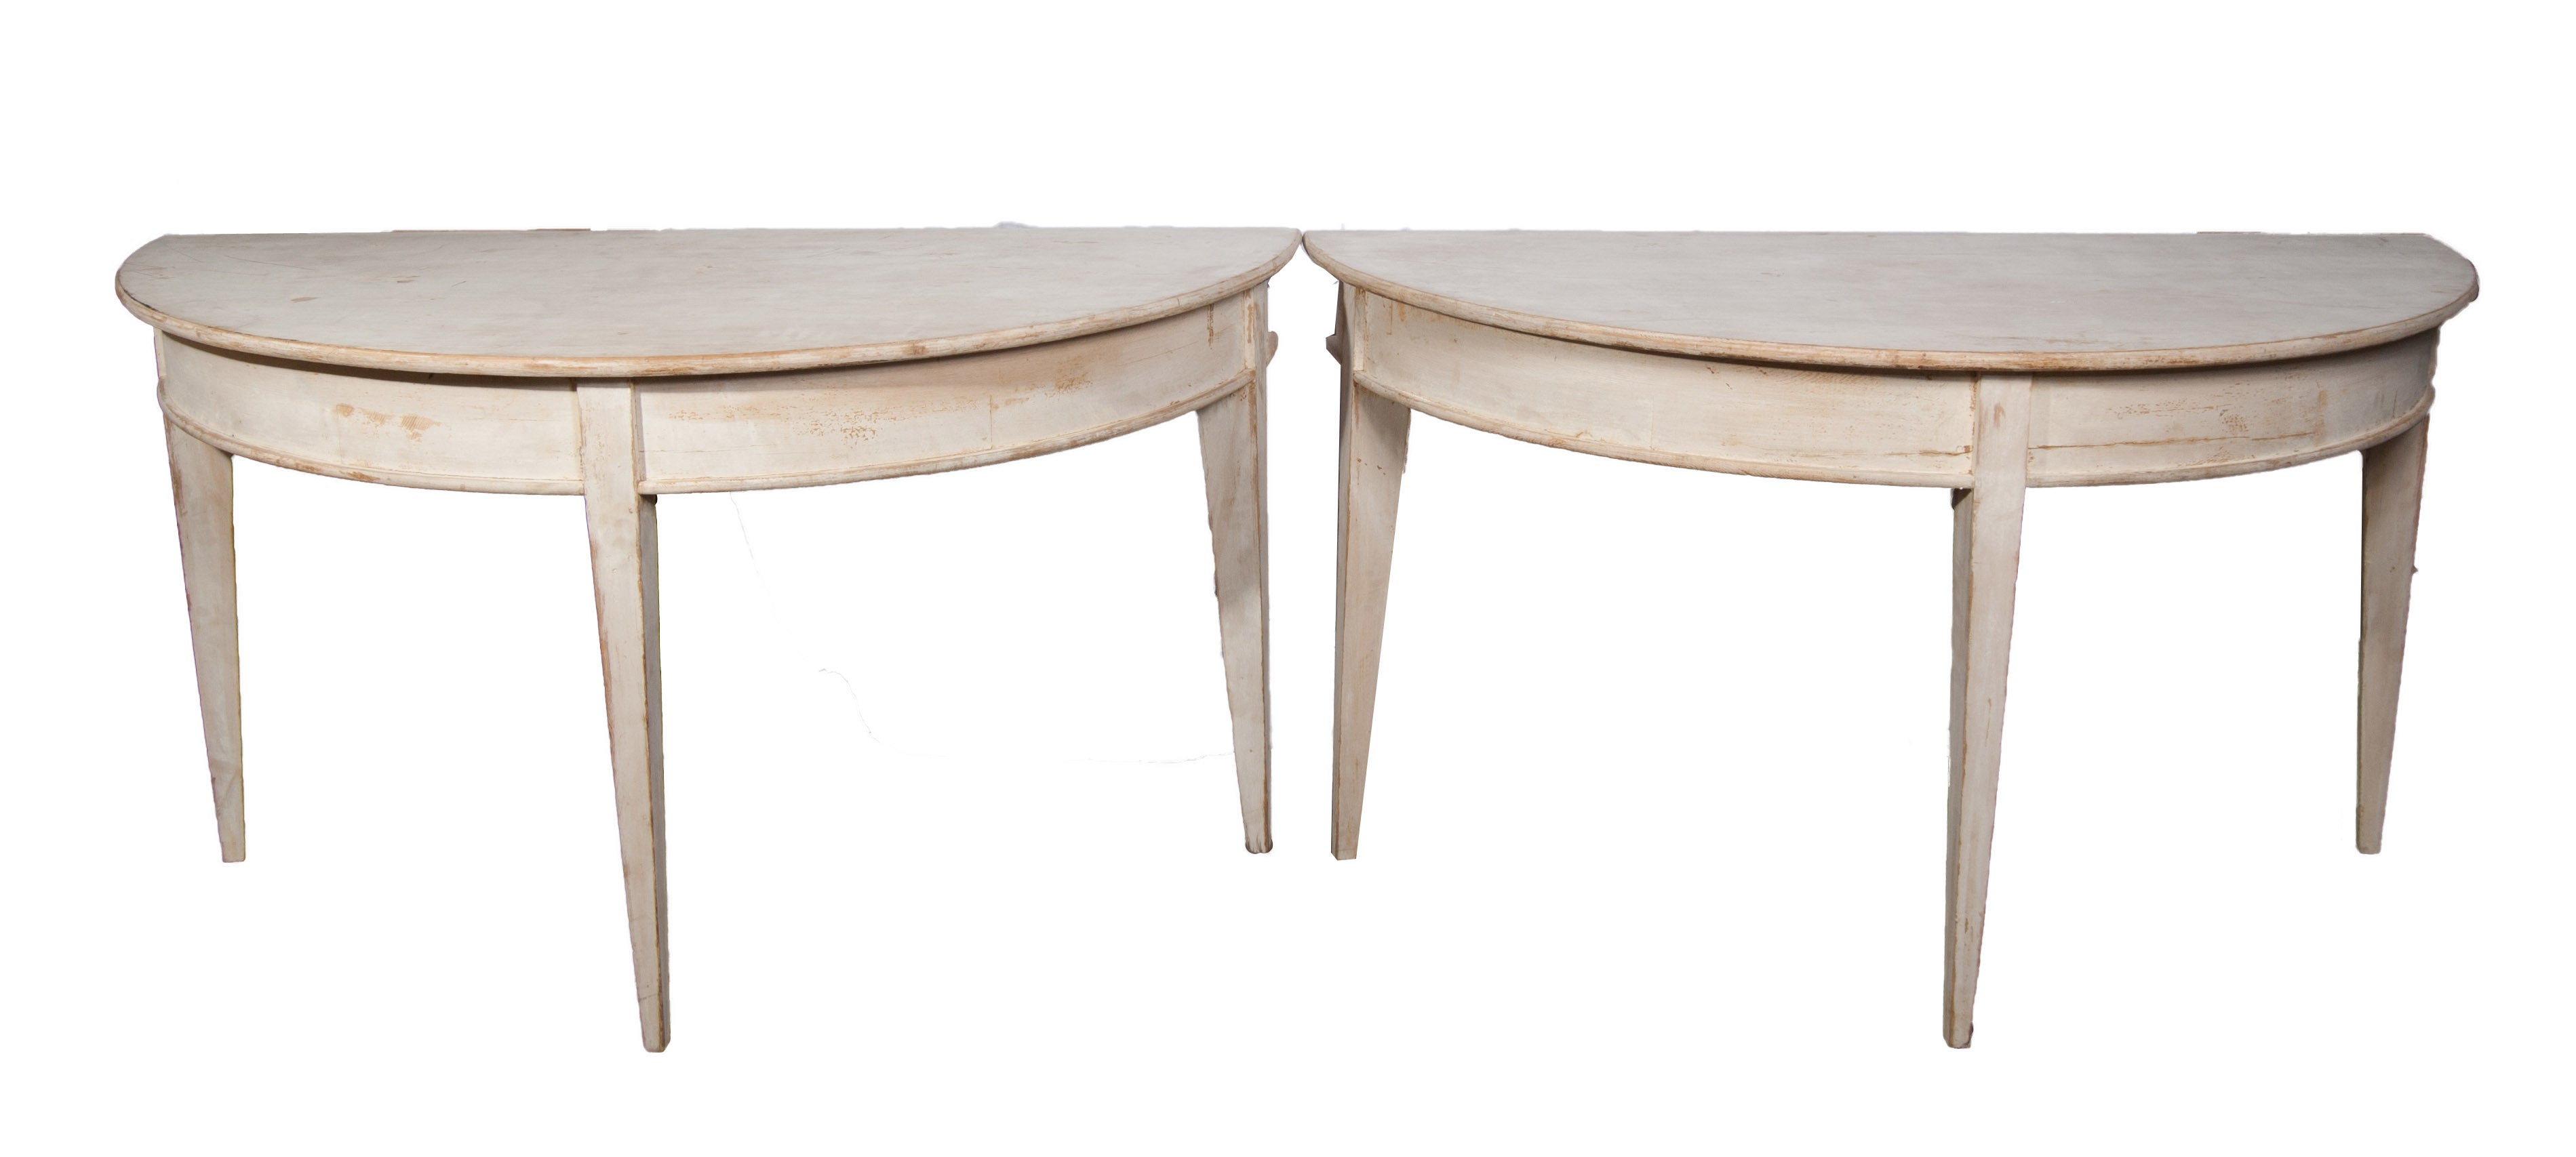 Pair of Large Painted Demi Lune Tables